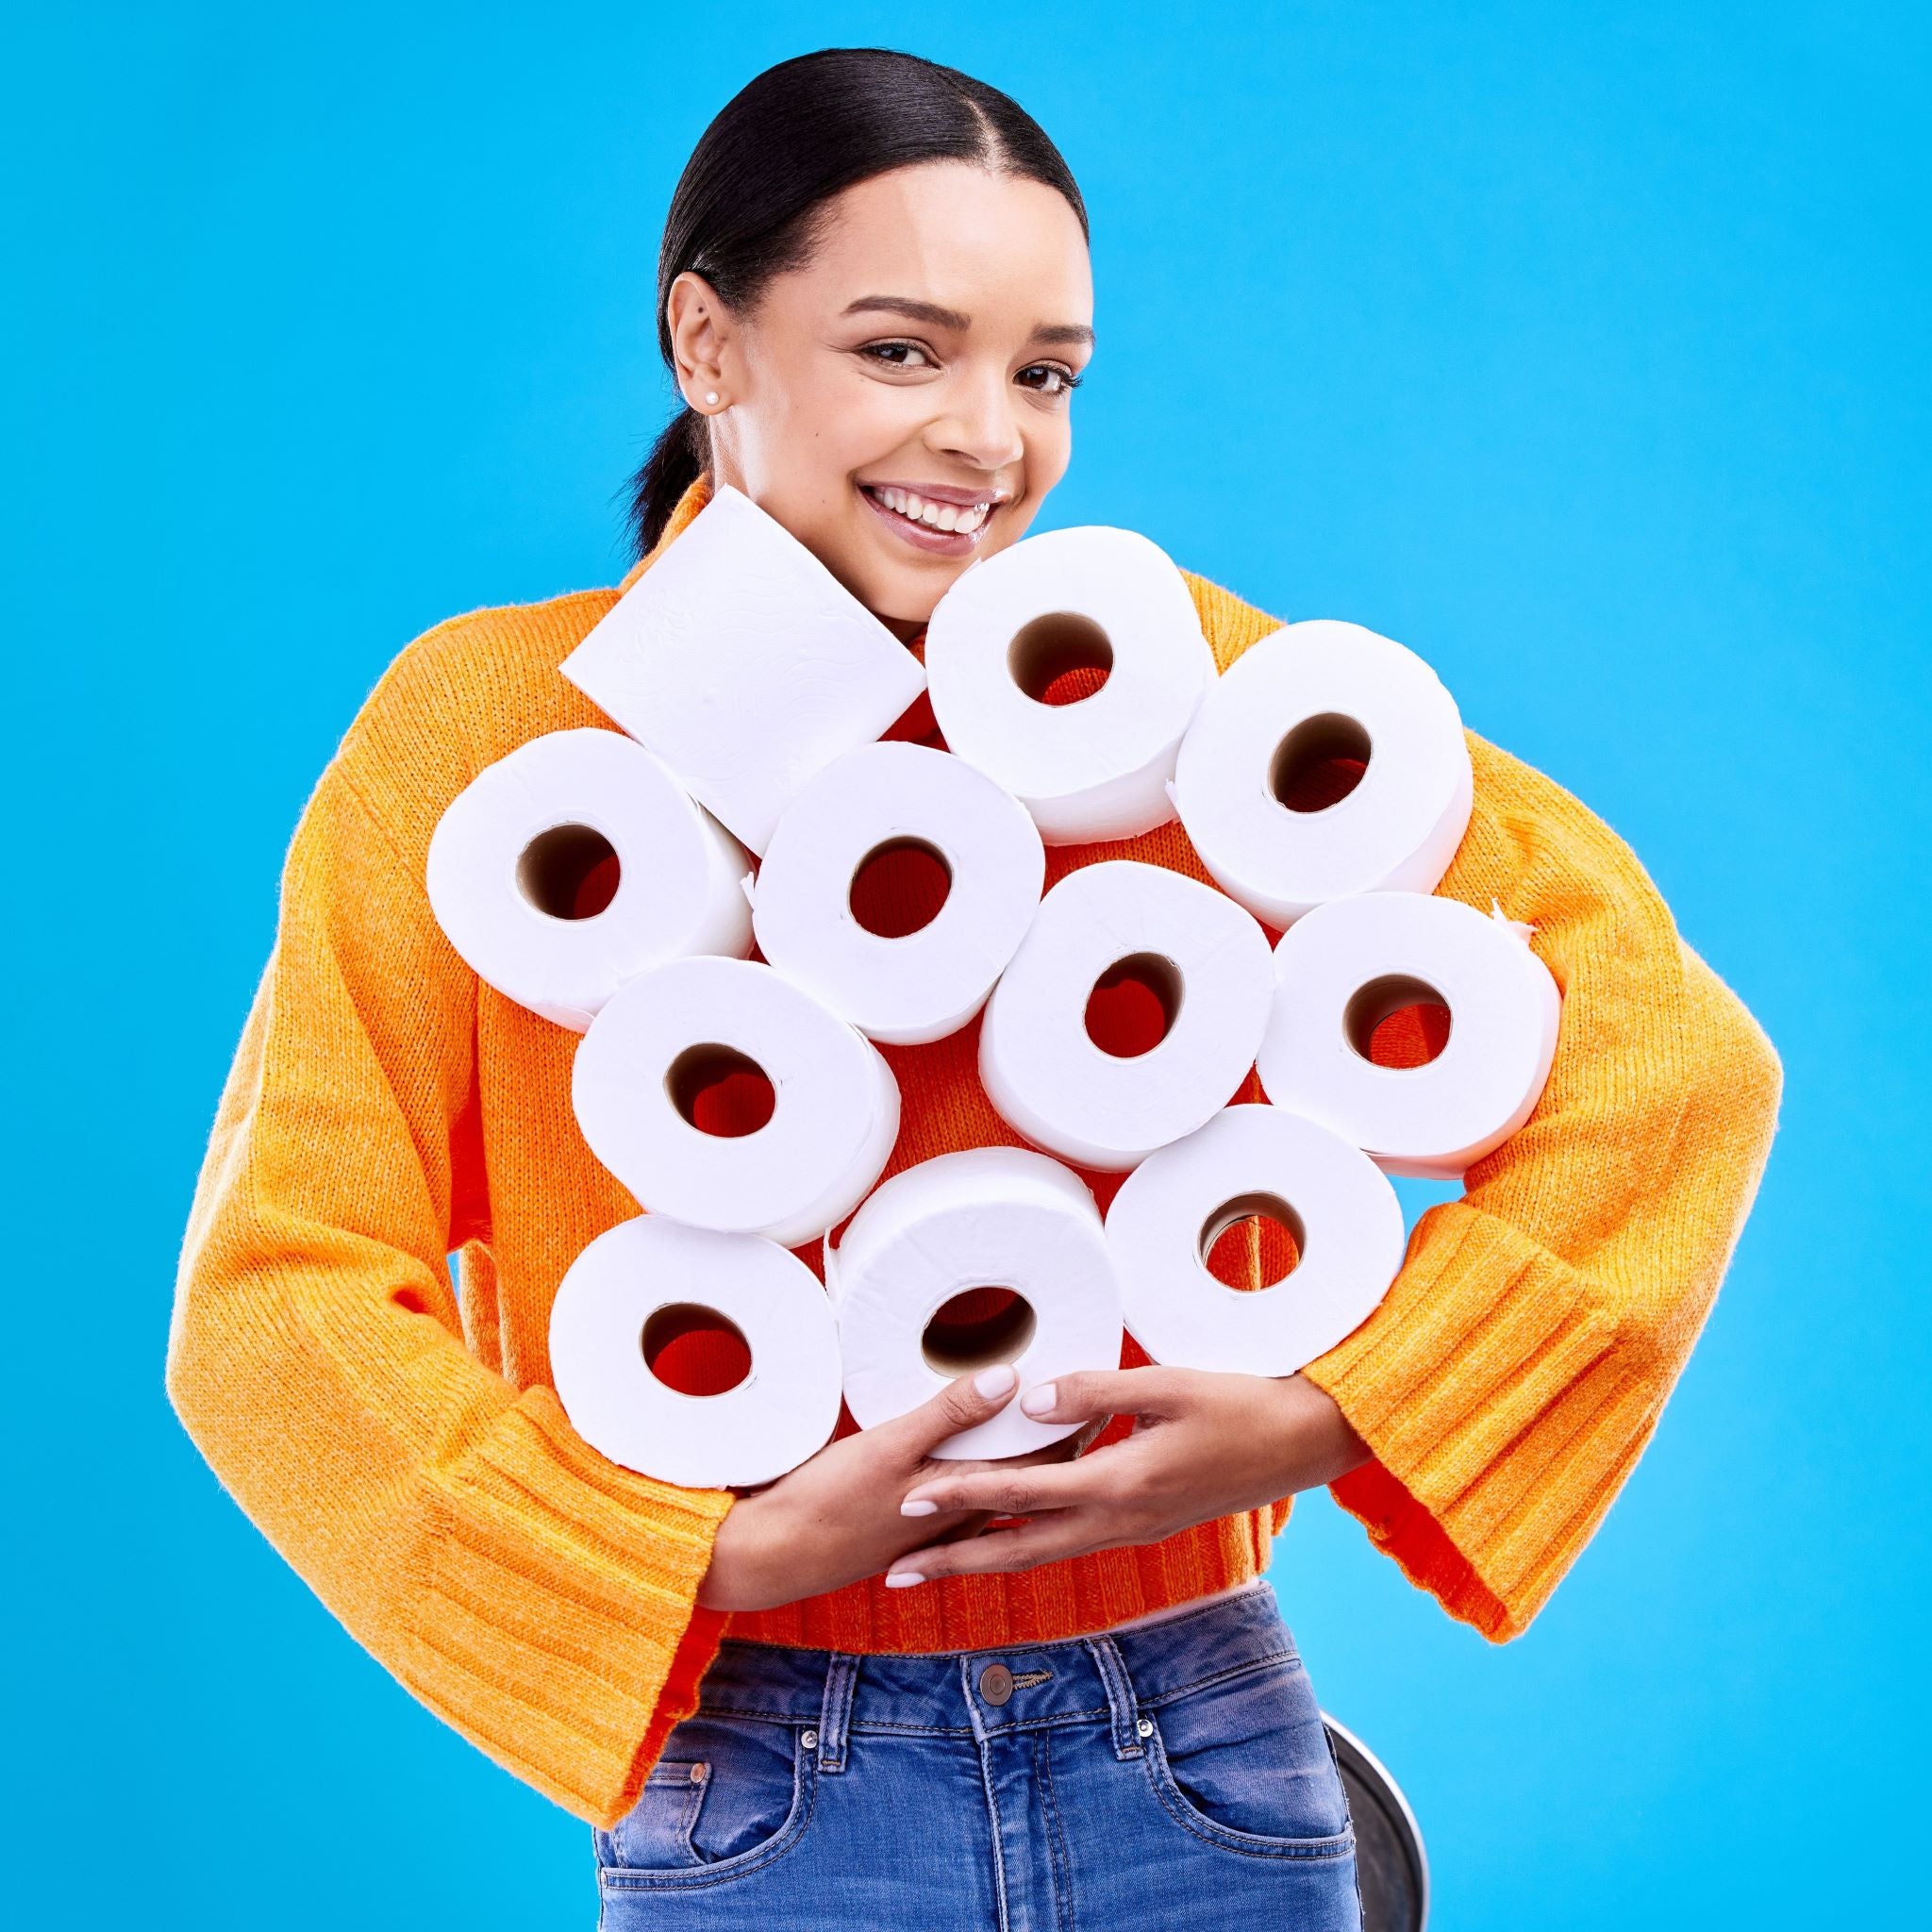 Lady with an armful of 100% recycled toilet paper rolls 